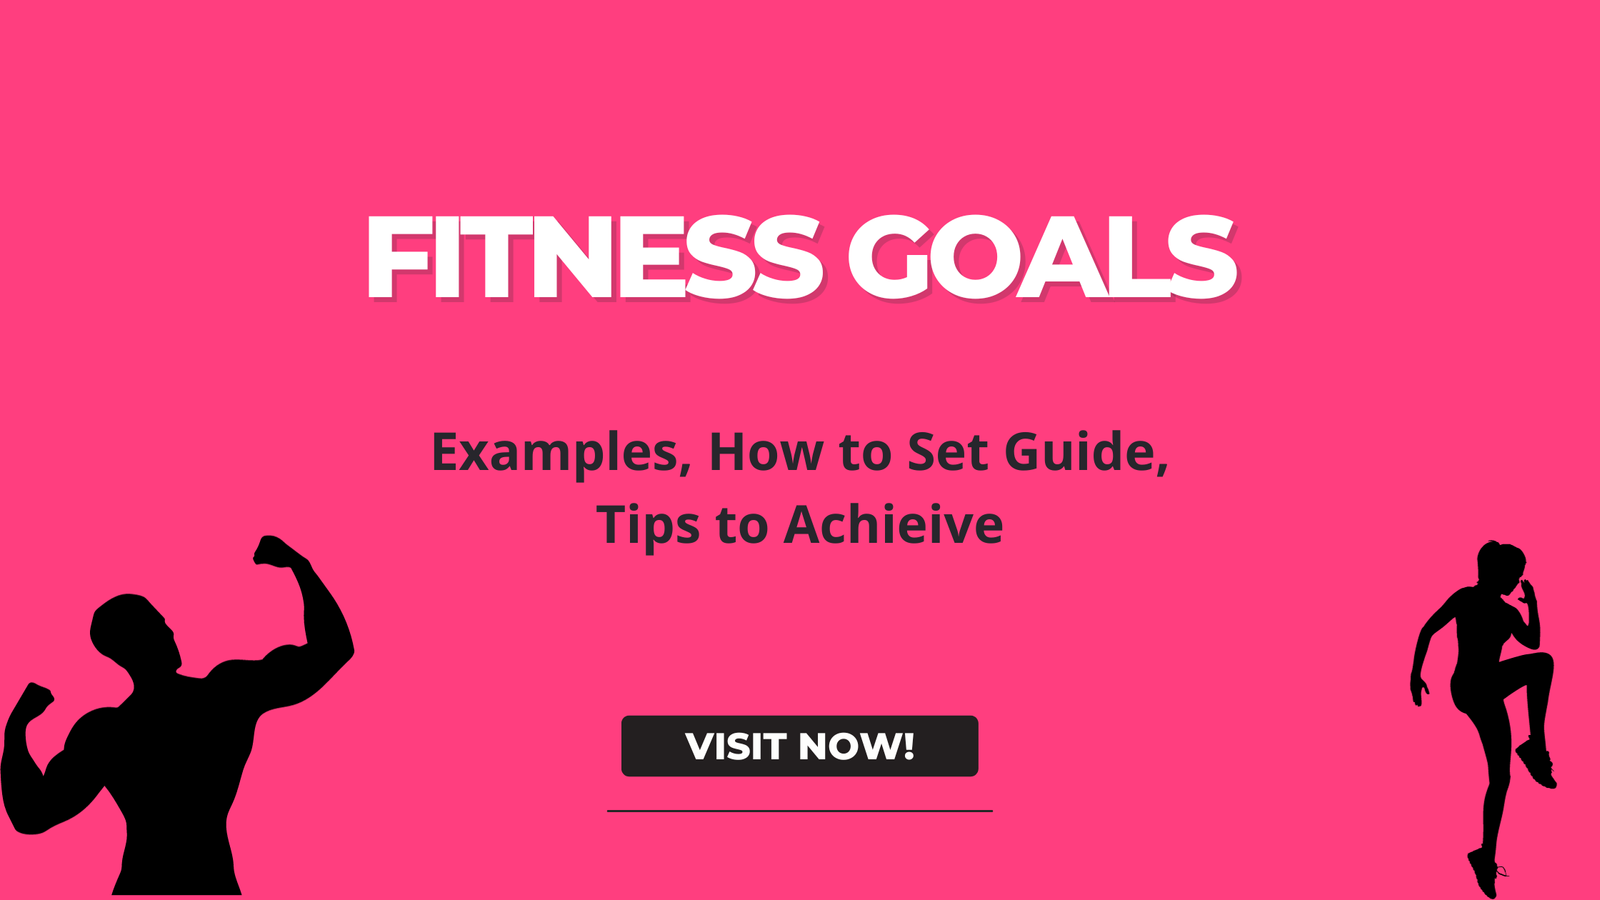 300+ Fitness Goals, Examples, How to Set, Tips to Achieve - eBestCourses